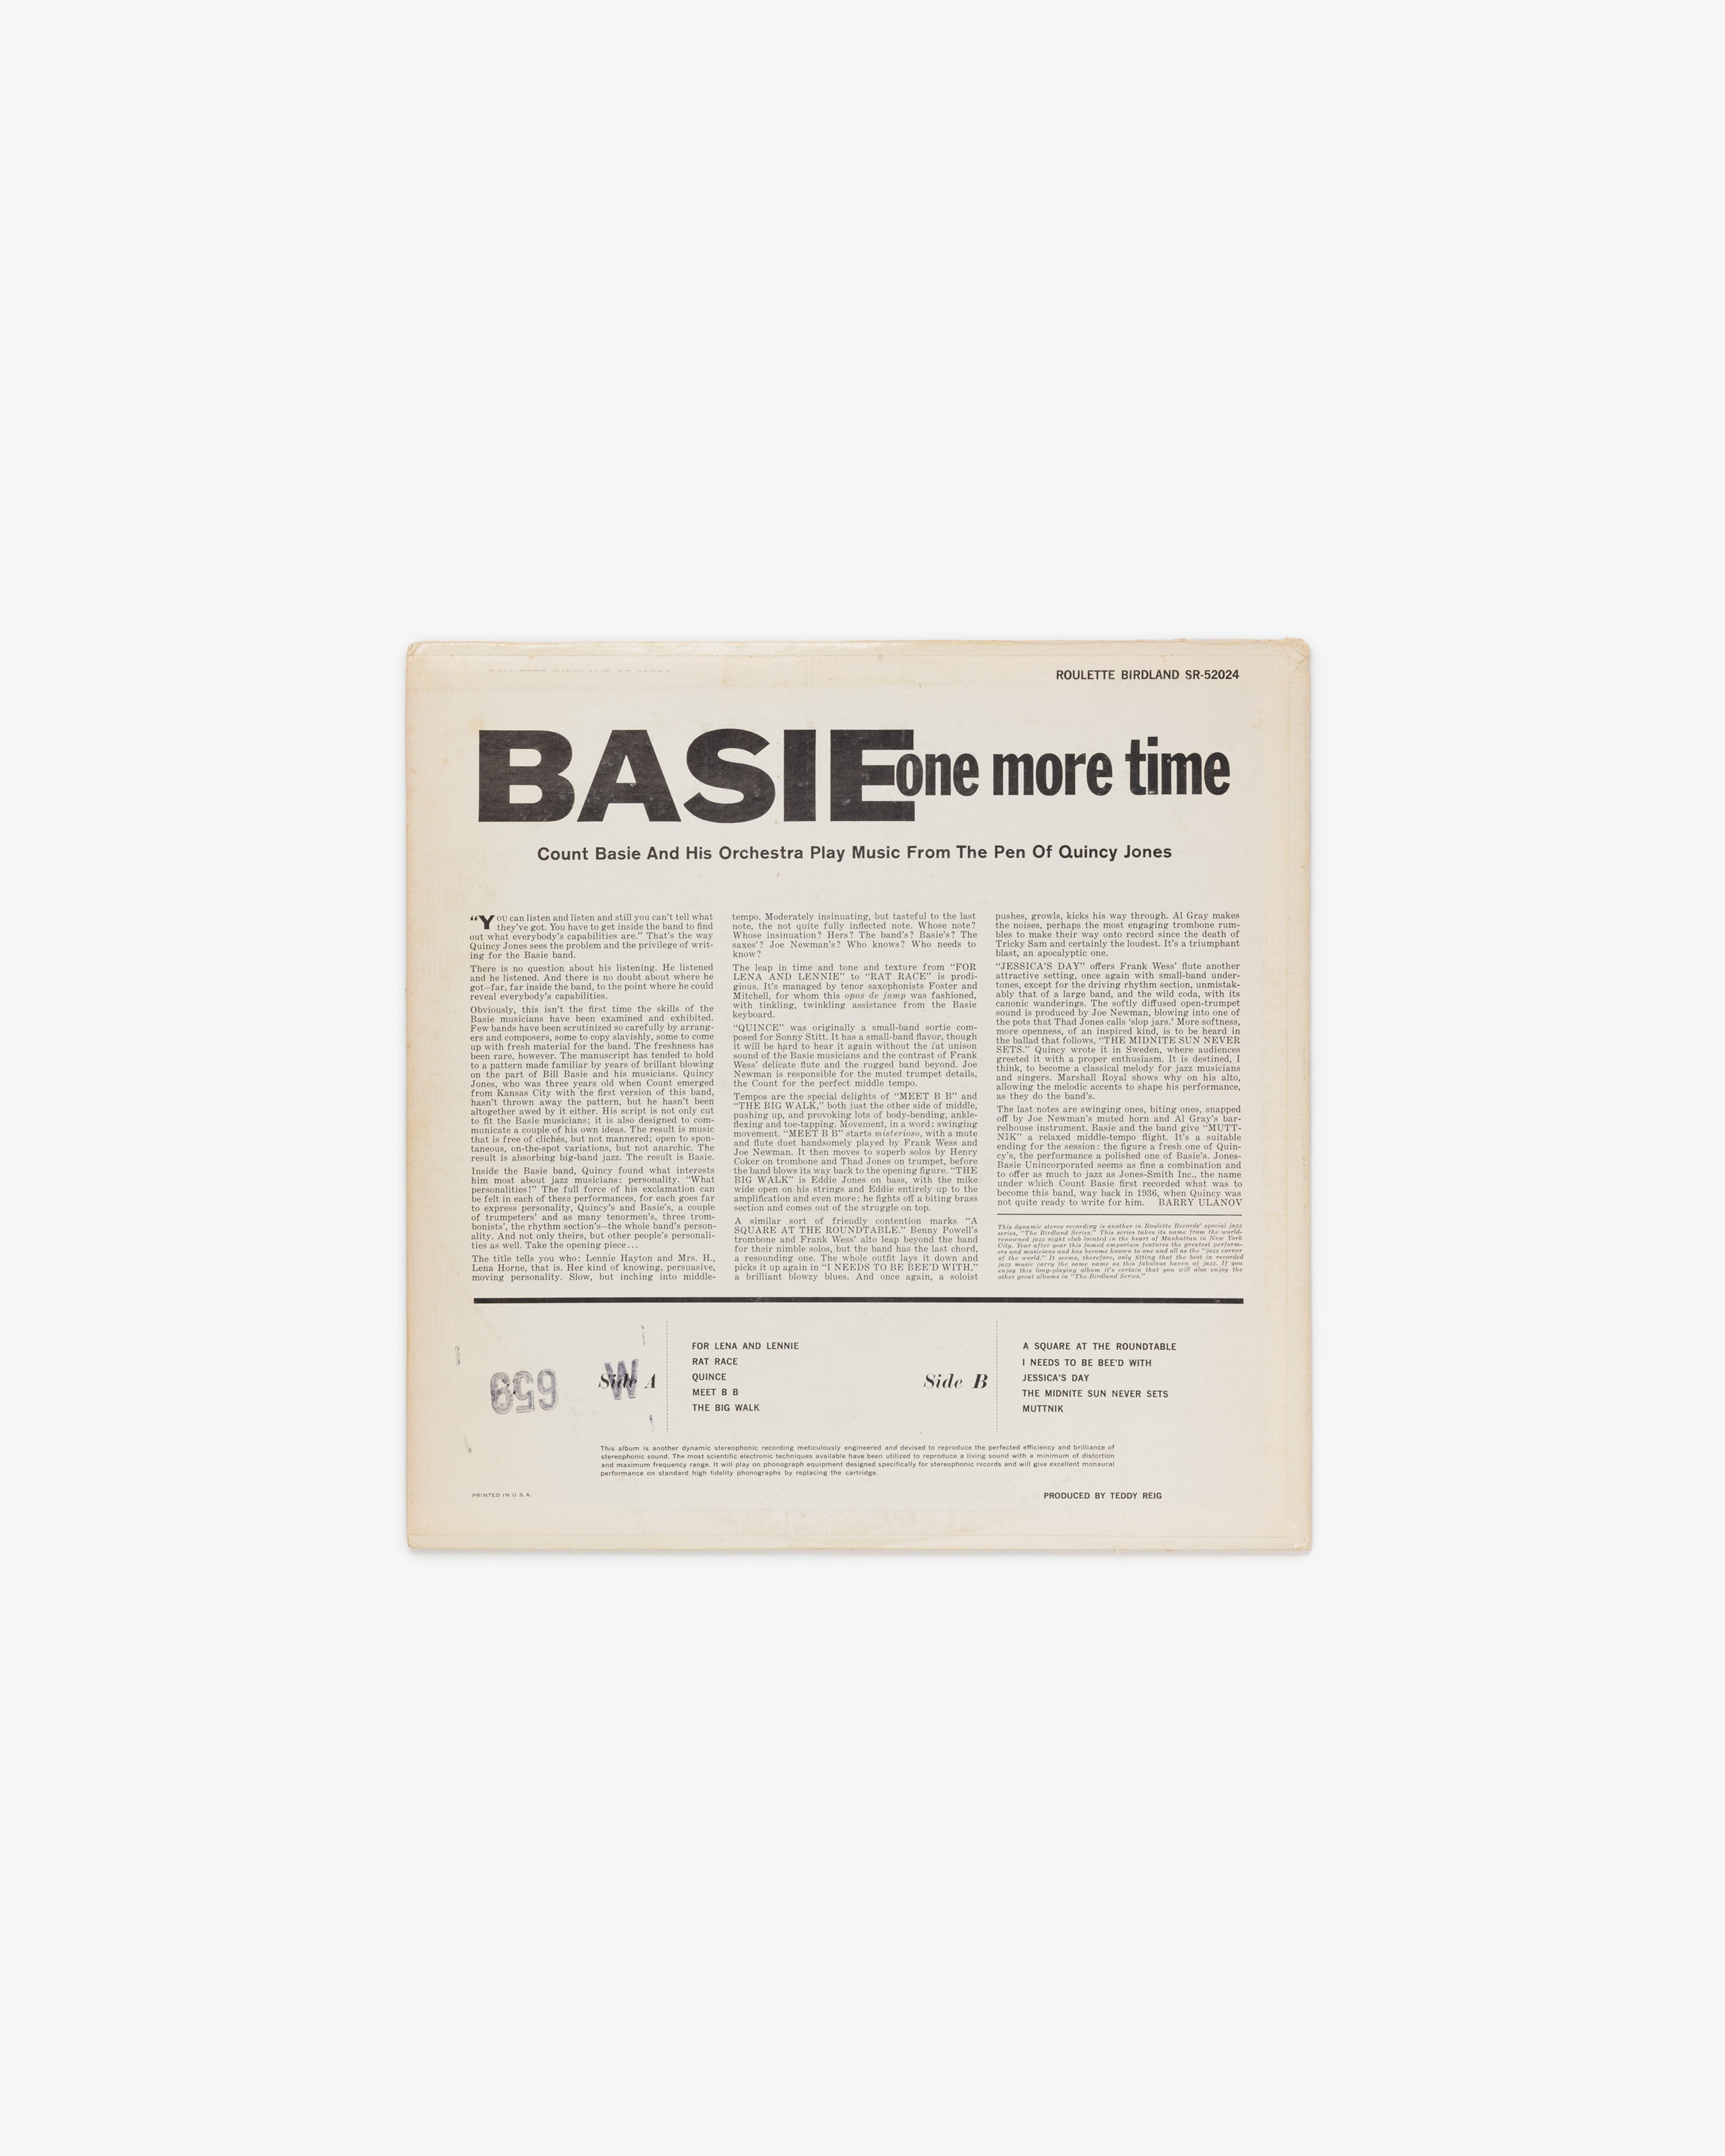 Count Basie Orchestra - Basie (One More Time) LP